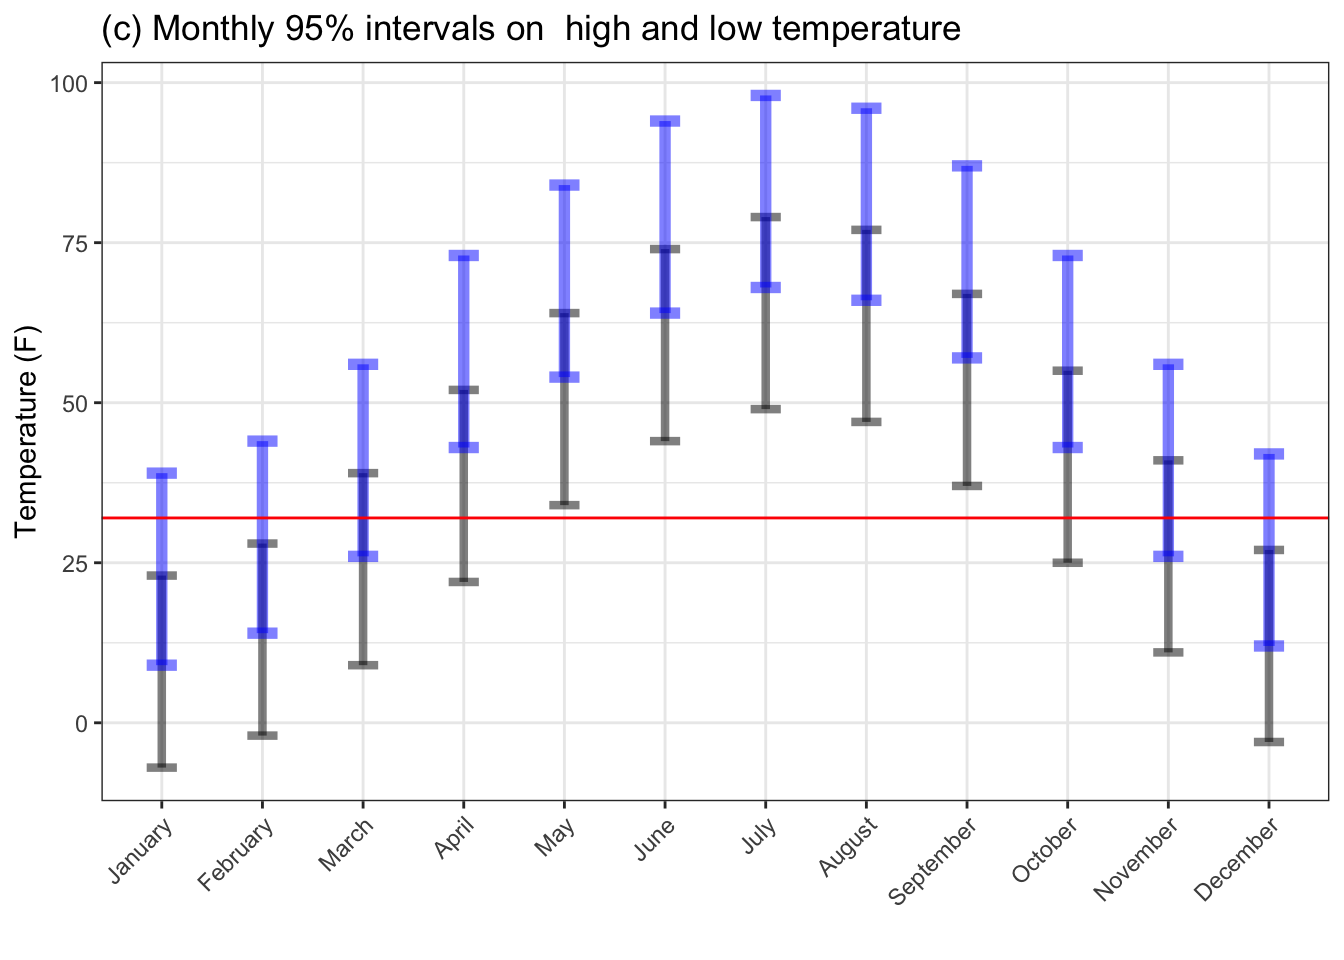 Monthly outdoor temperatures in St. Paul, Minnesota. (a) shows the mean temperature. (b) shows both the mean high and low temperatures. (c) gives 95% summary intervals on the high and low. The horizontal line indicates the temperature of freezing.